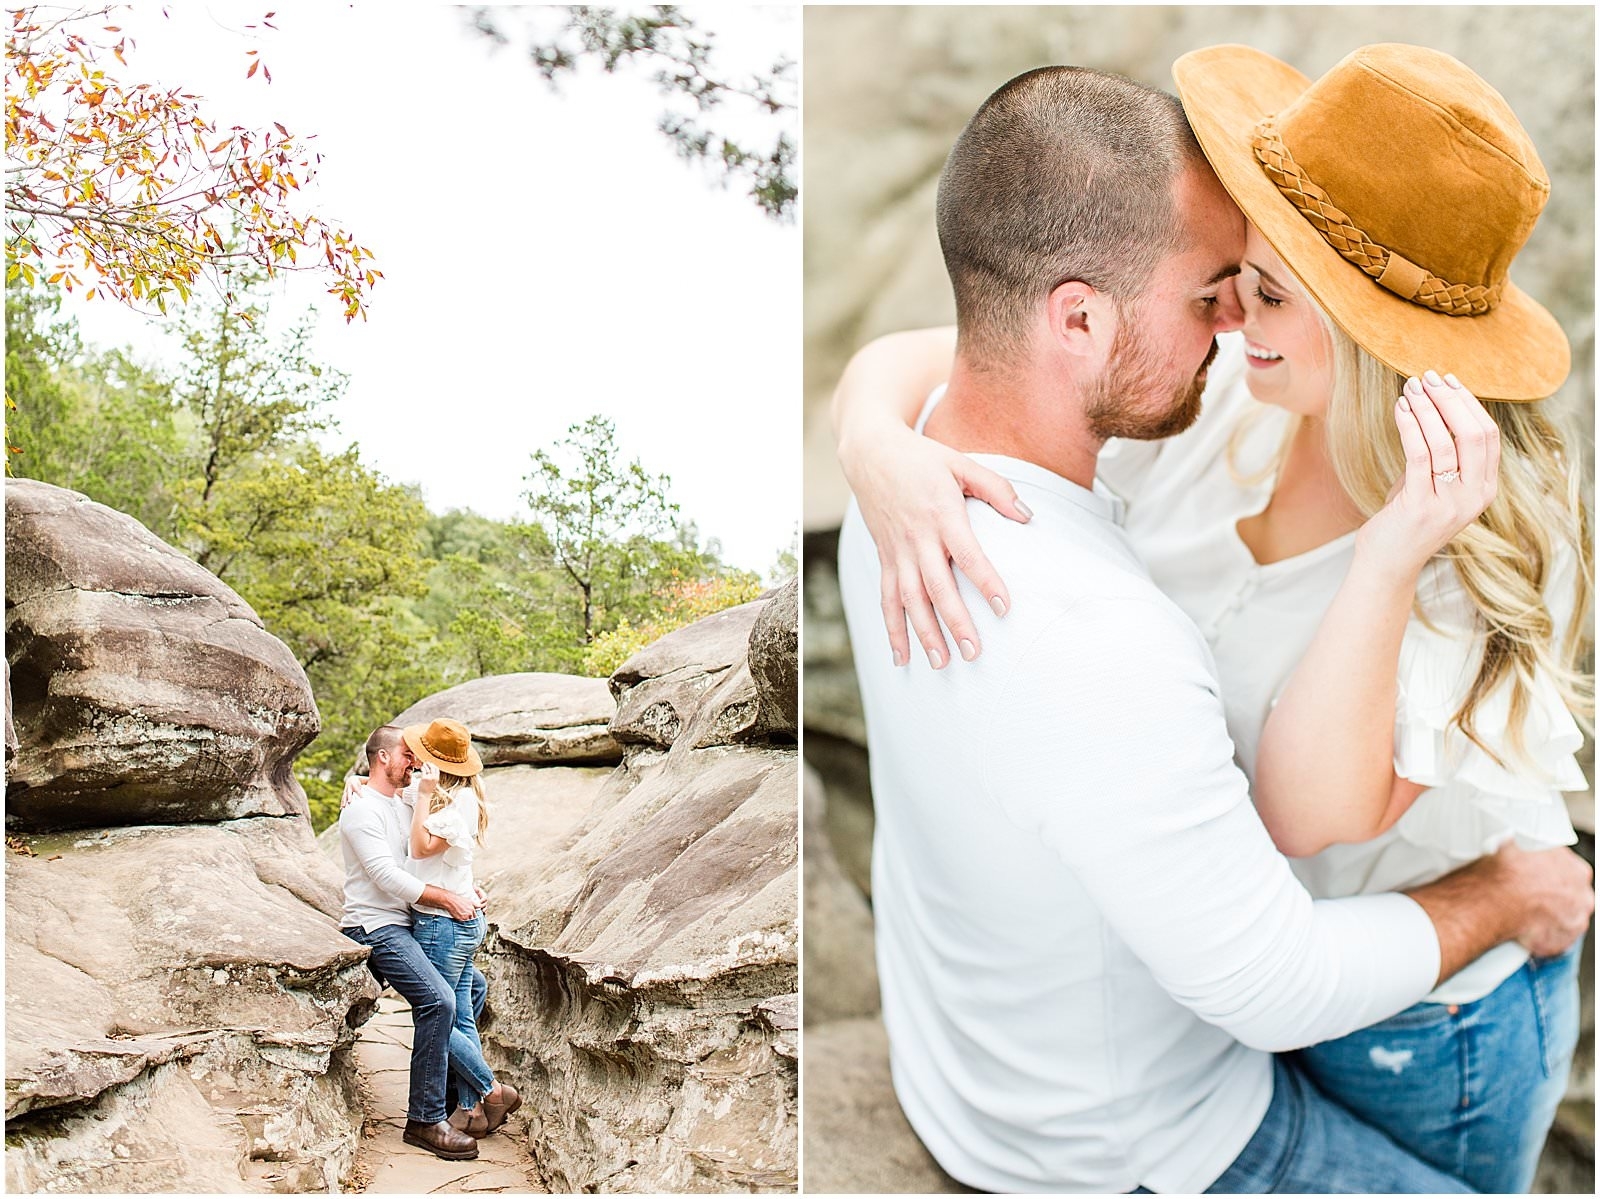 The Best of Engagement Sessions 2020 Recap0009.jpg